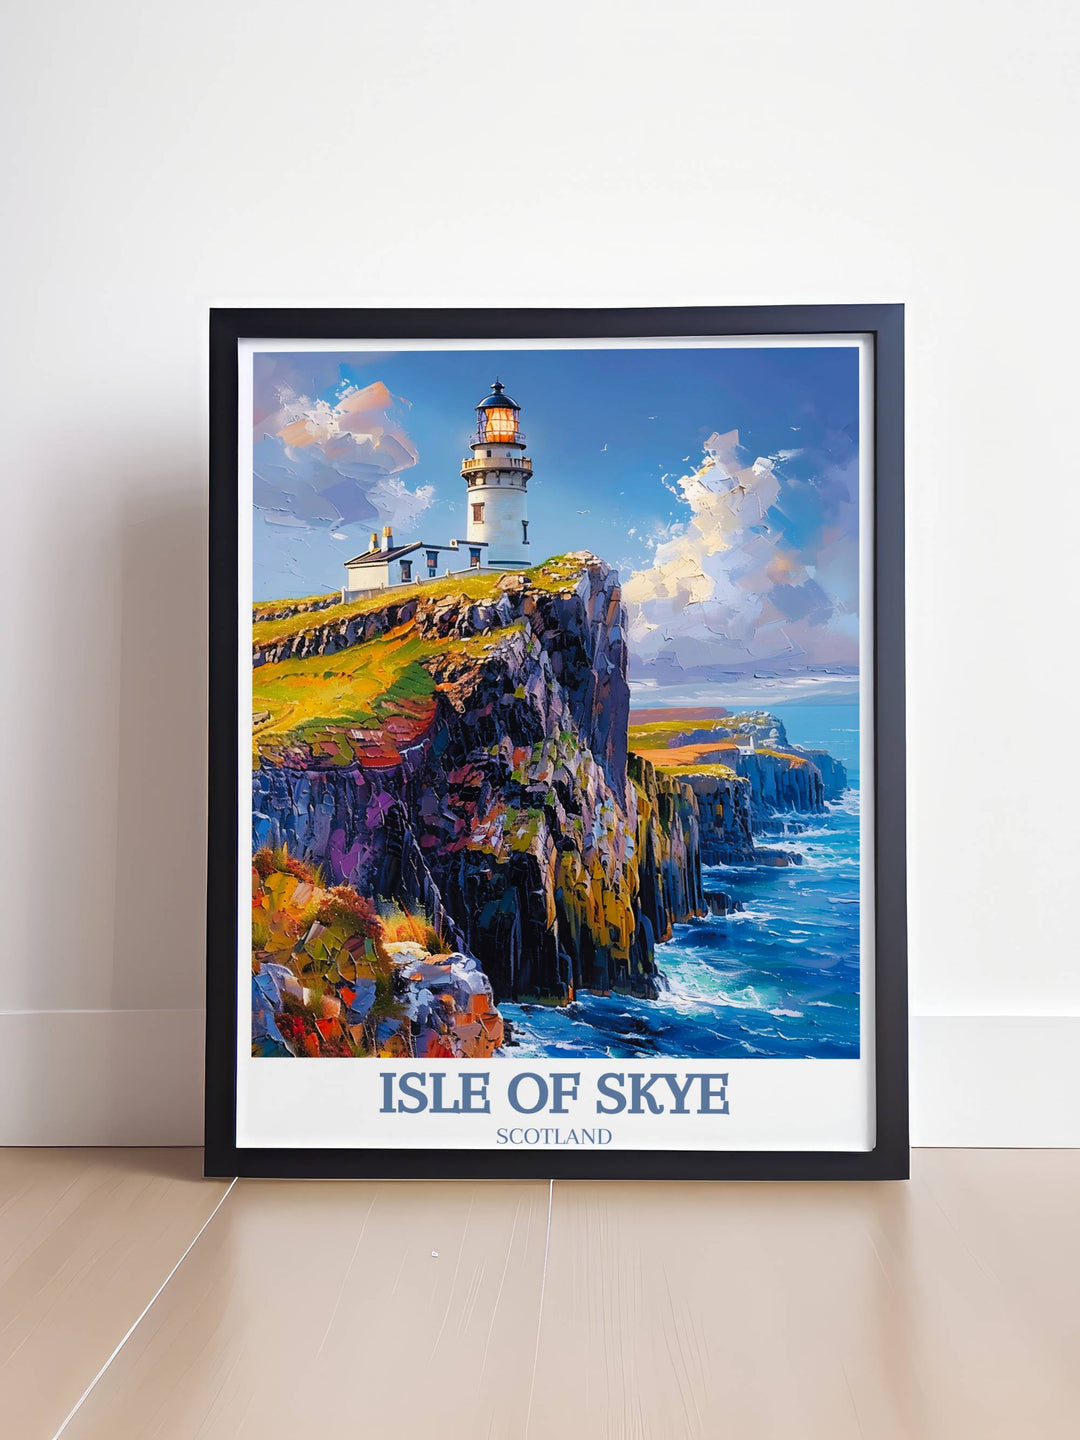 A striking Isle of Skye poster capturing Neist Point Lighthouse at sunset, offering warm hues that enhance any room's atmosphere.